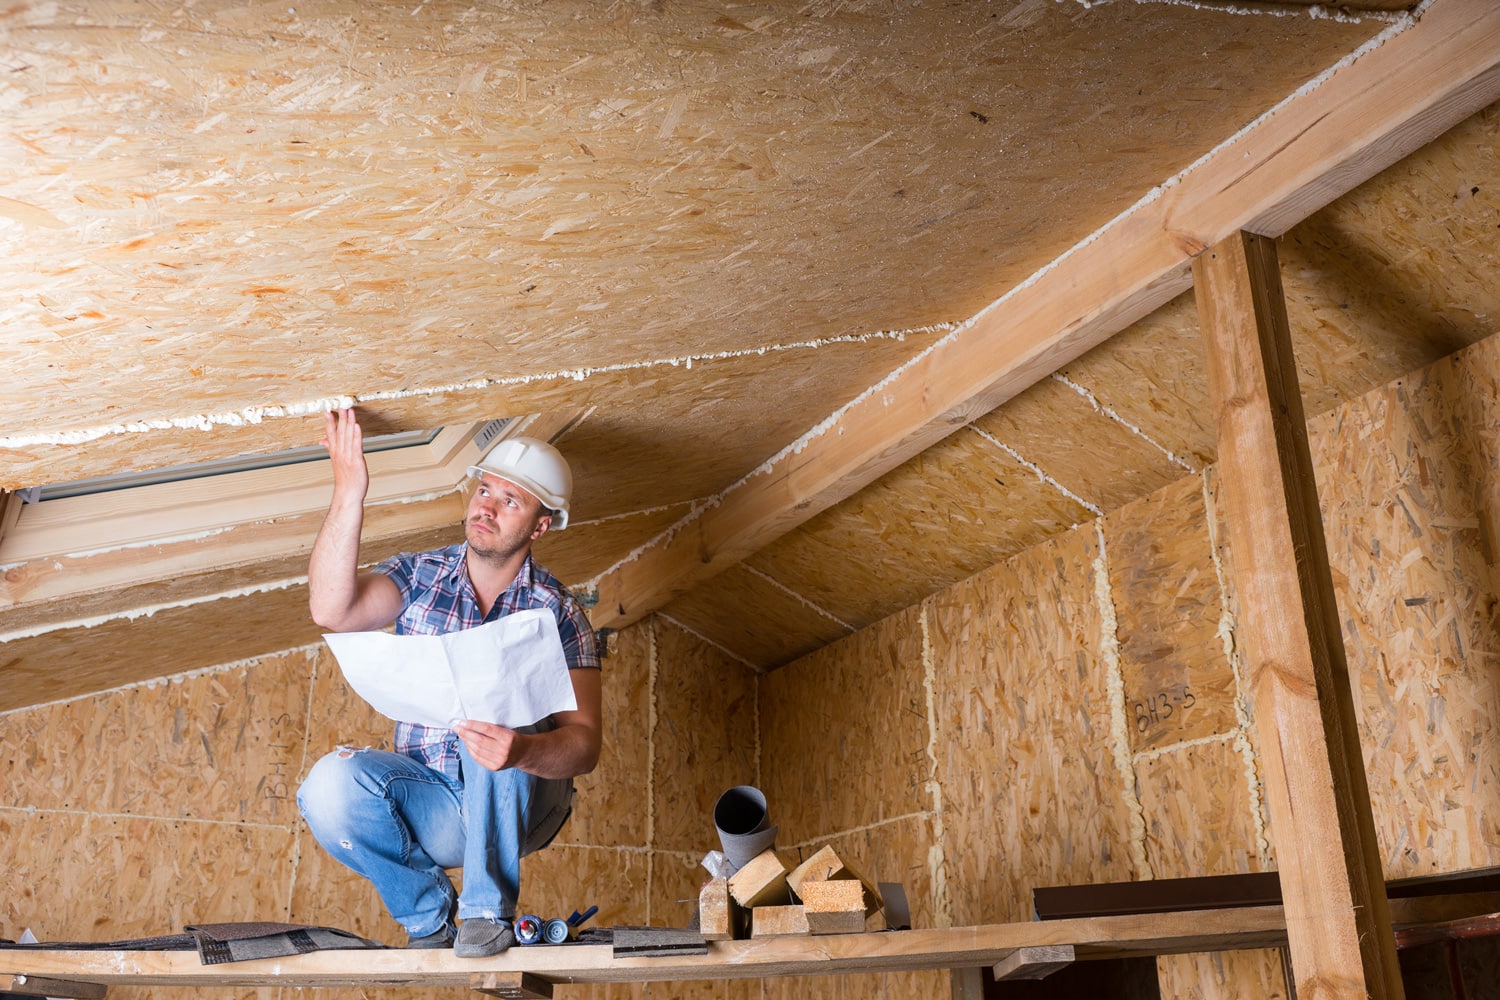 Male Construction Worker Builder Wearing White Hard Hat Crouching on Elevated Scaffolding and Reading Plans near Ceiling of Unfinished Home with Exposed Plywood Particle Board